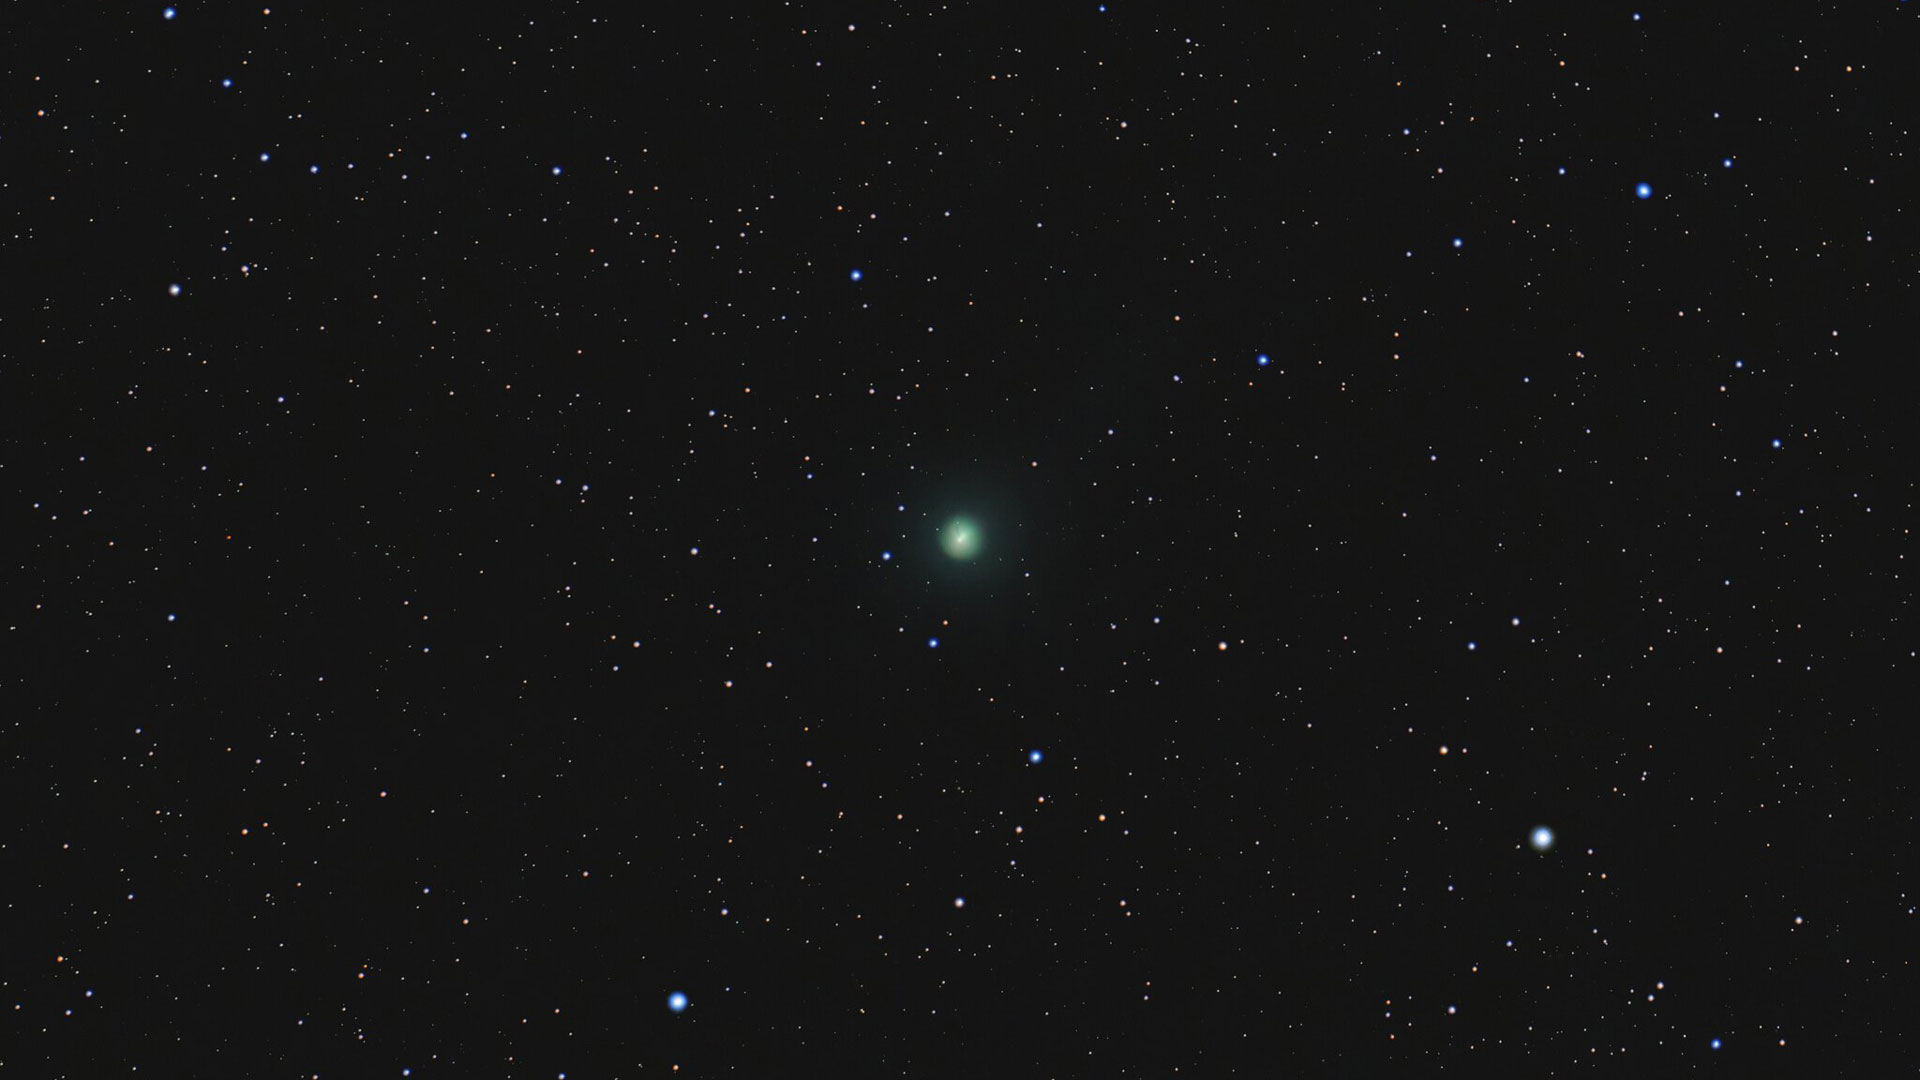 12P/Pons–Brooks is a Halley-type periodic comet with an orbital period of 71 years. It was discovered in 1812 and later recovered during passages in 1883 and 1954. It is expected to brighten to an apparent magnitude of 4.5 (visible to the naked eye) during its upcoming passage in April 2024.